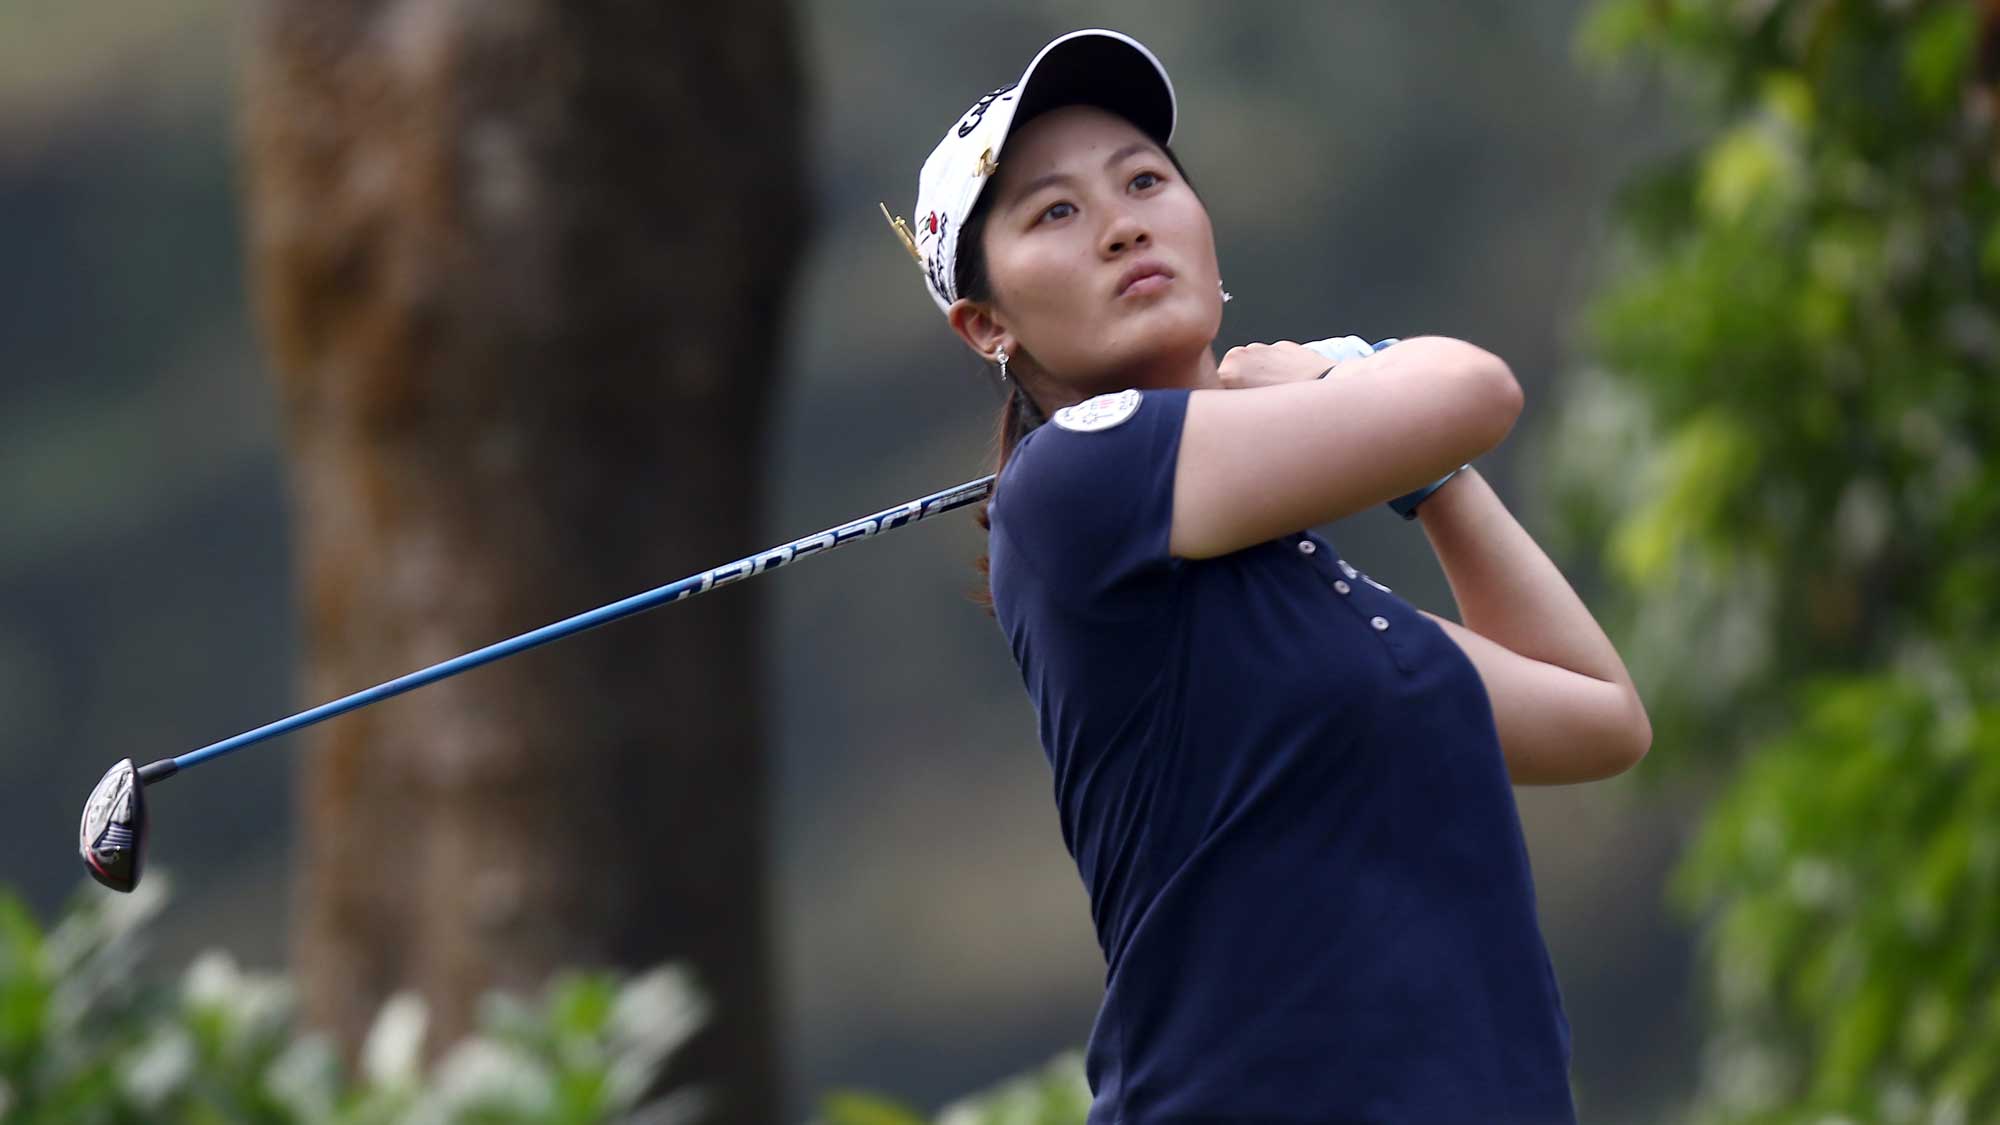 Xi Yu Lin of China watches her tee shot on the 4th hole during round three of the Sime Darby LPGA Tour at Kuala Lumpur Golf & Country Club